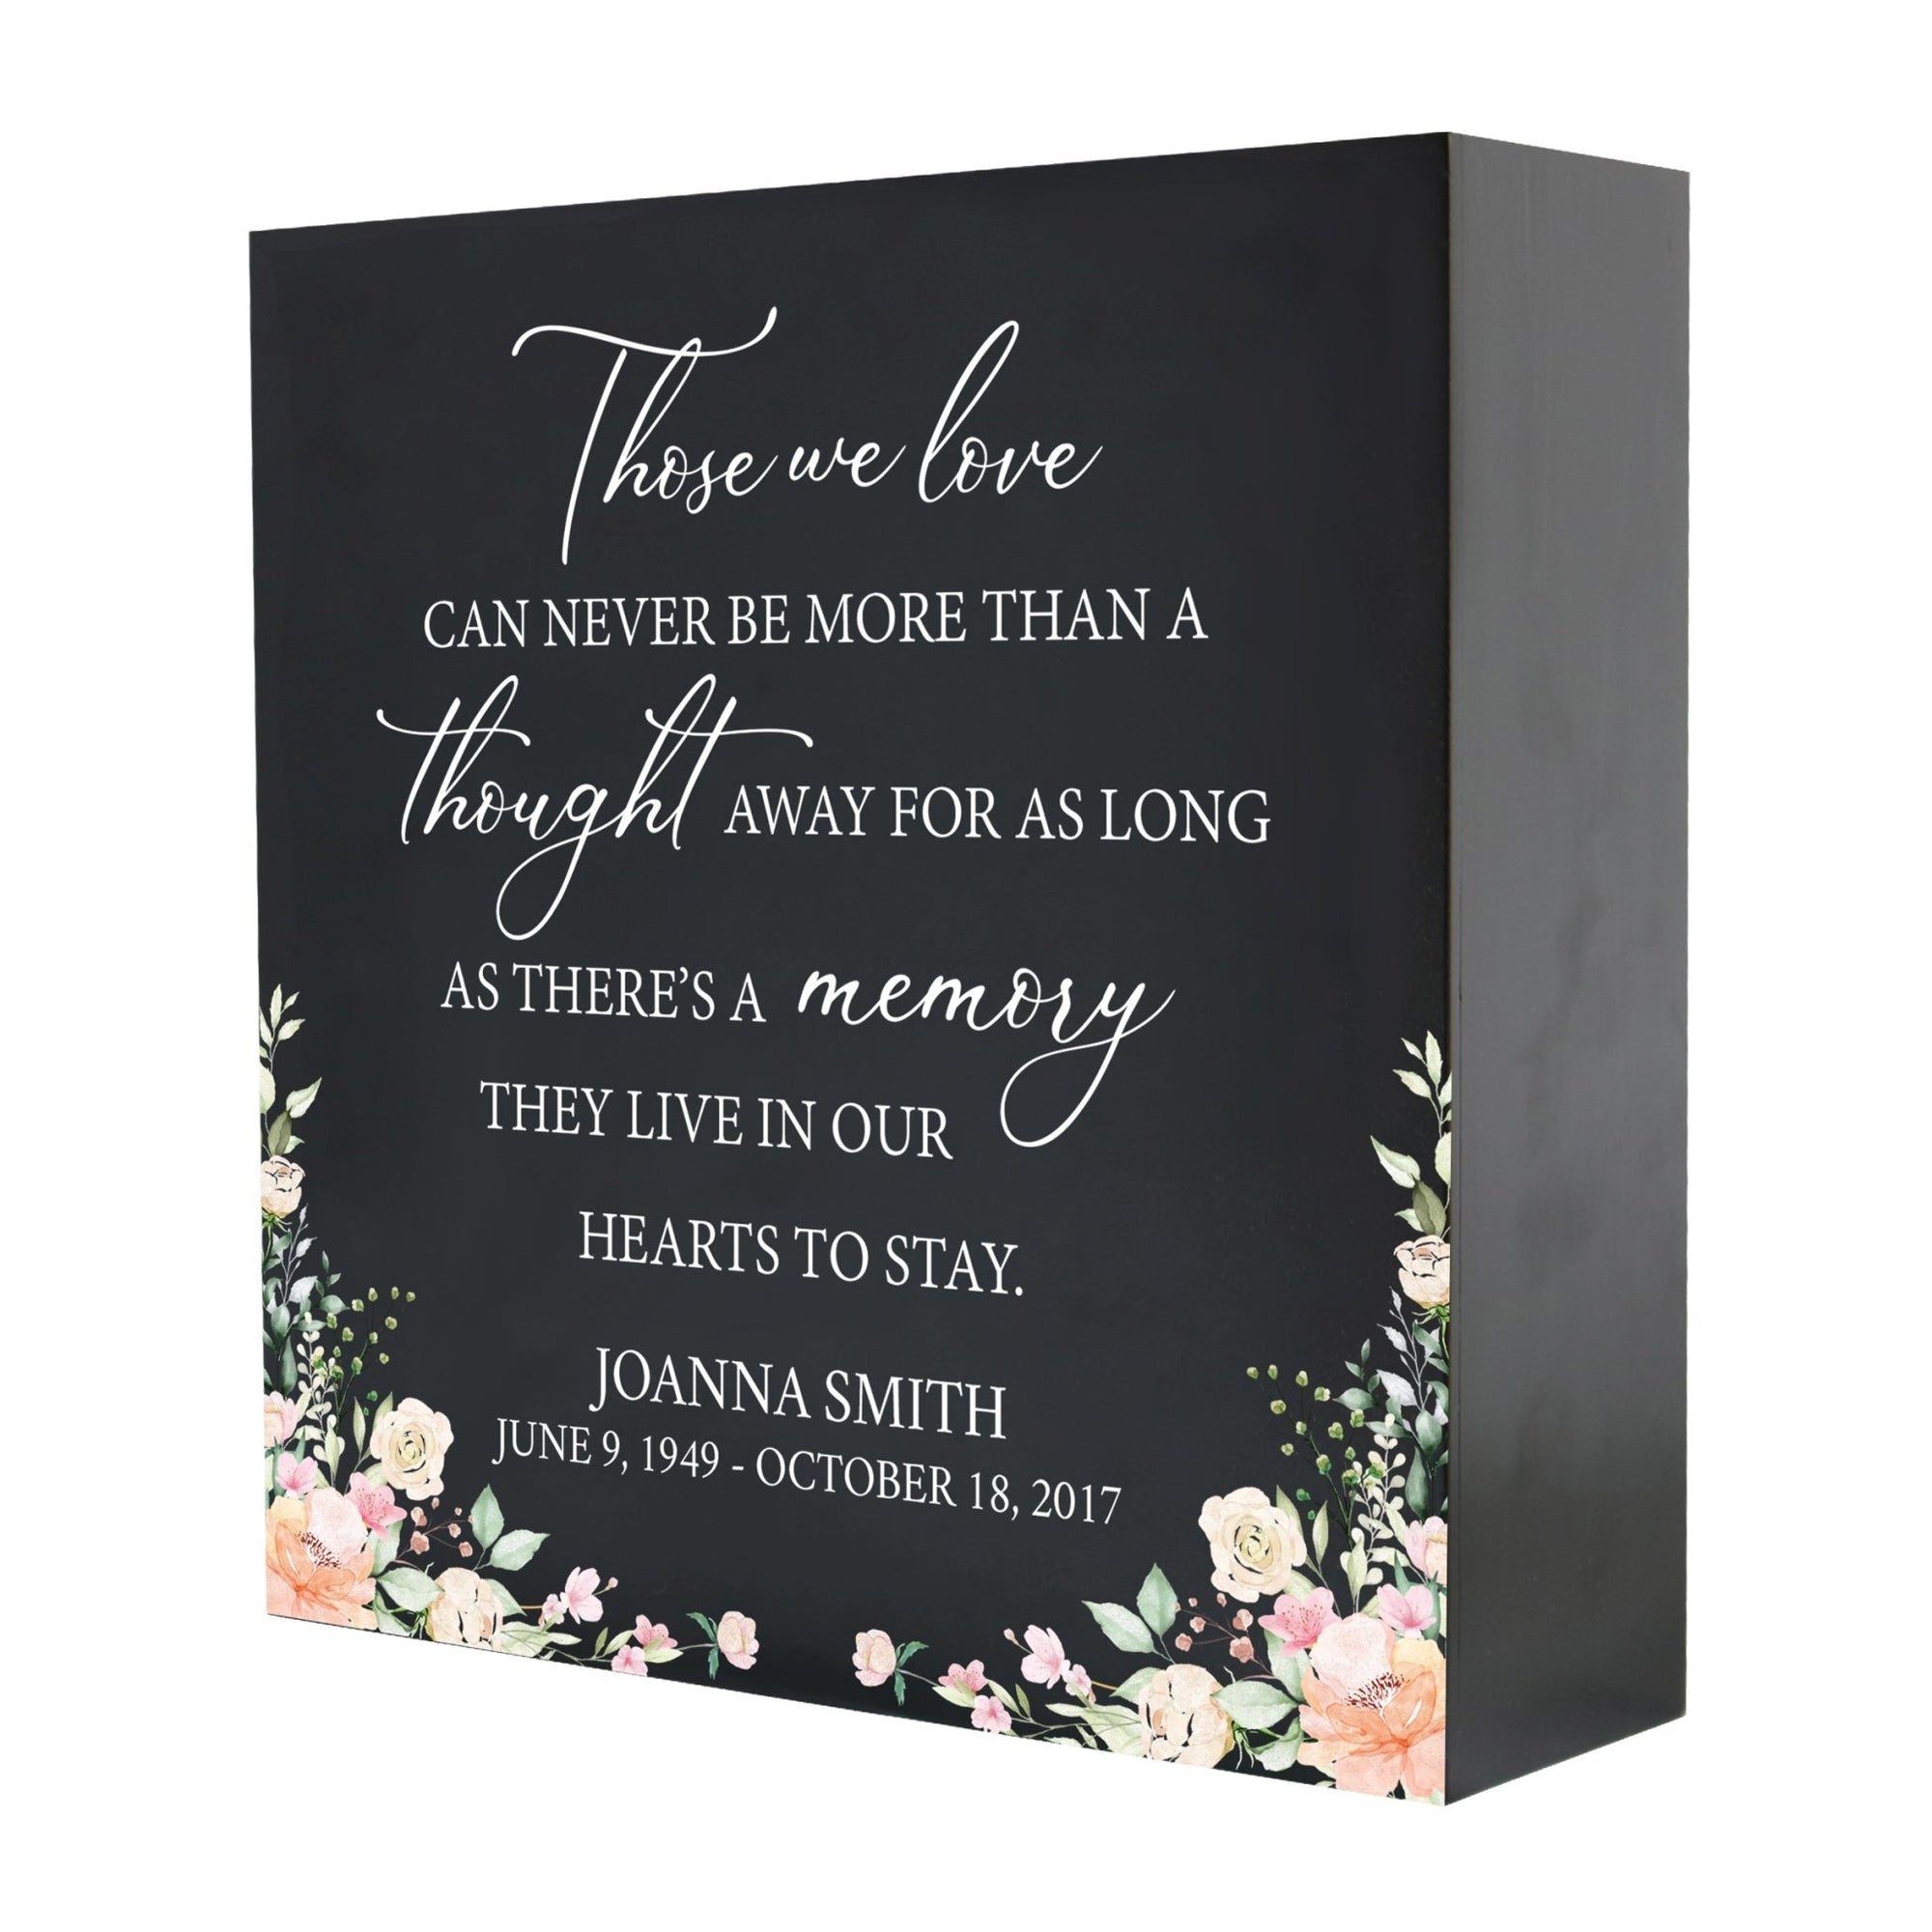 Personalized Modern Inspirational Memorial Wooden Shadow Box and Urn 10x10 holds 189 cu in of Human Ashes - Those We Love Can Never (Black) - LifeSong Milestones